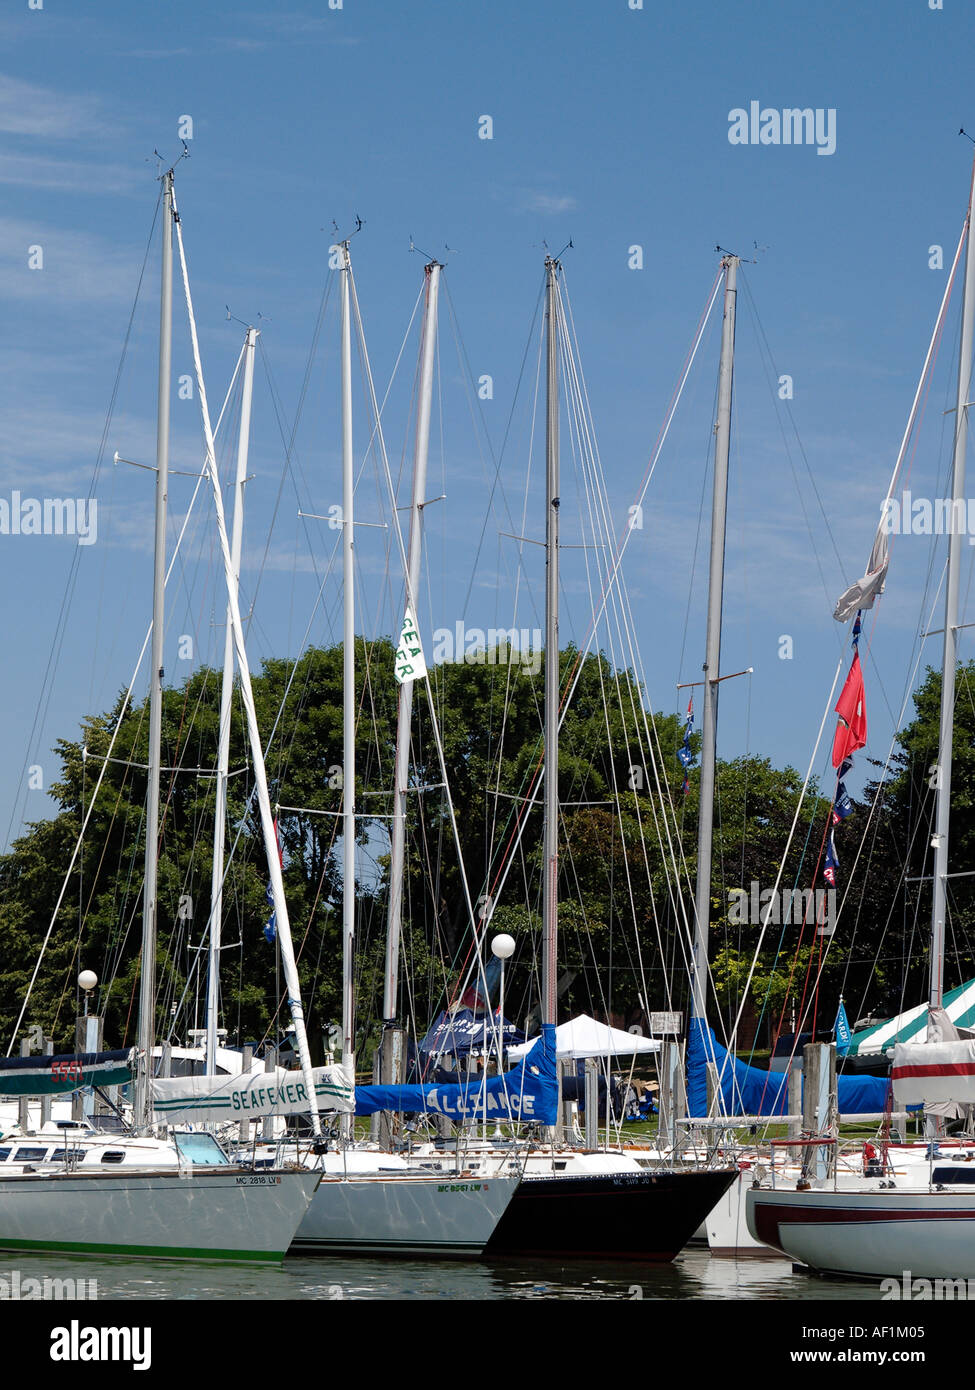 Sailboats docked waiting for the race Stock Photo